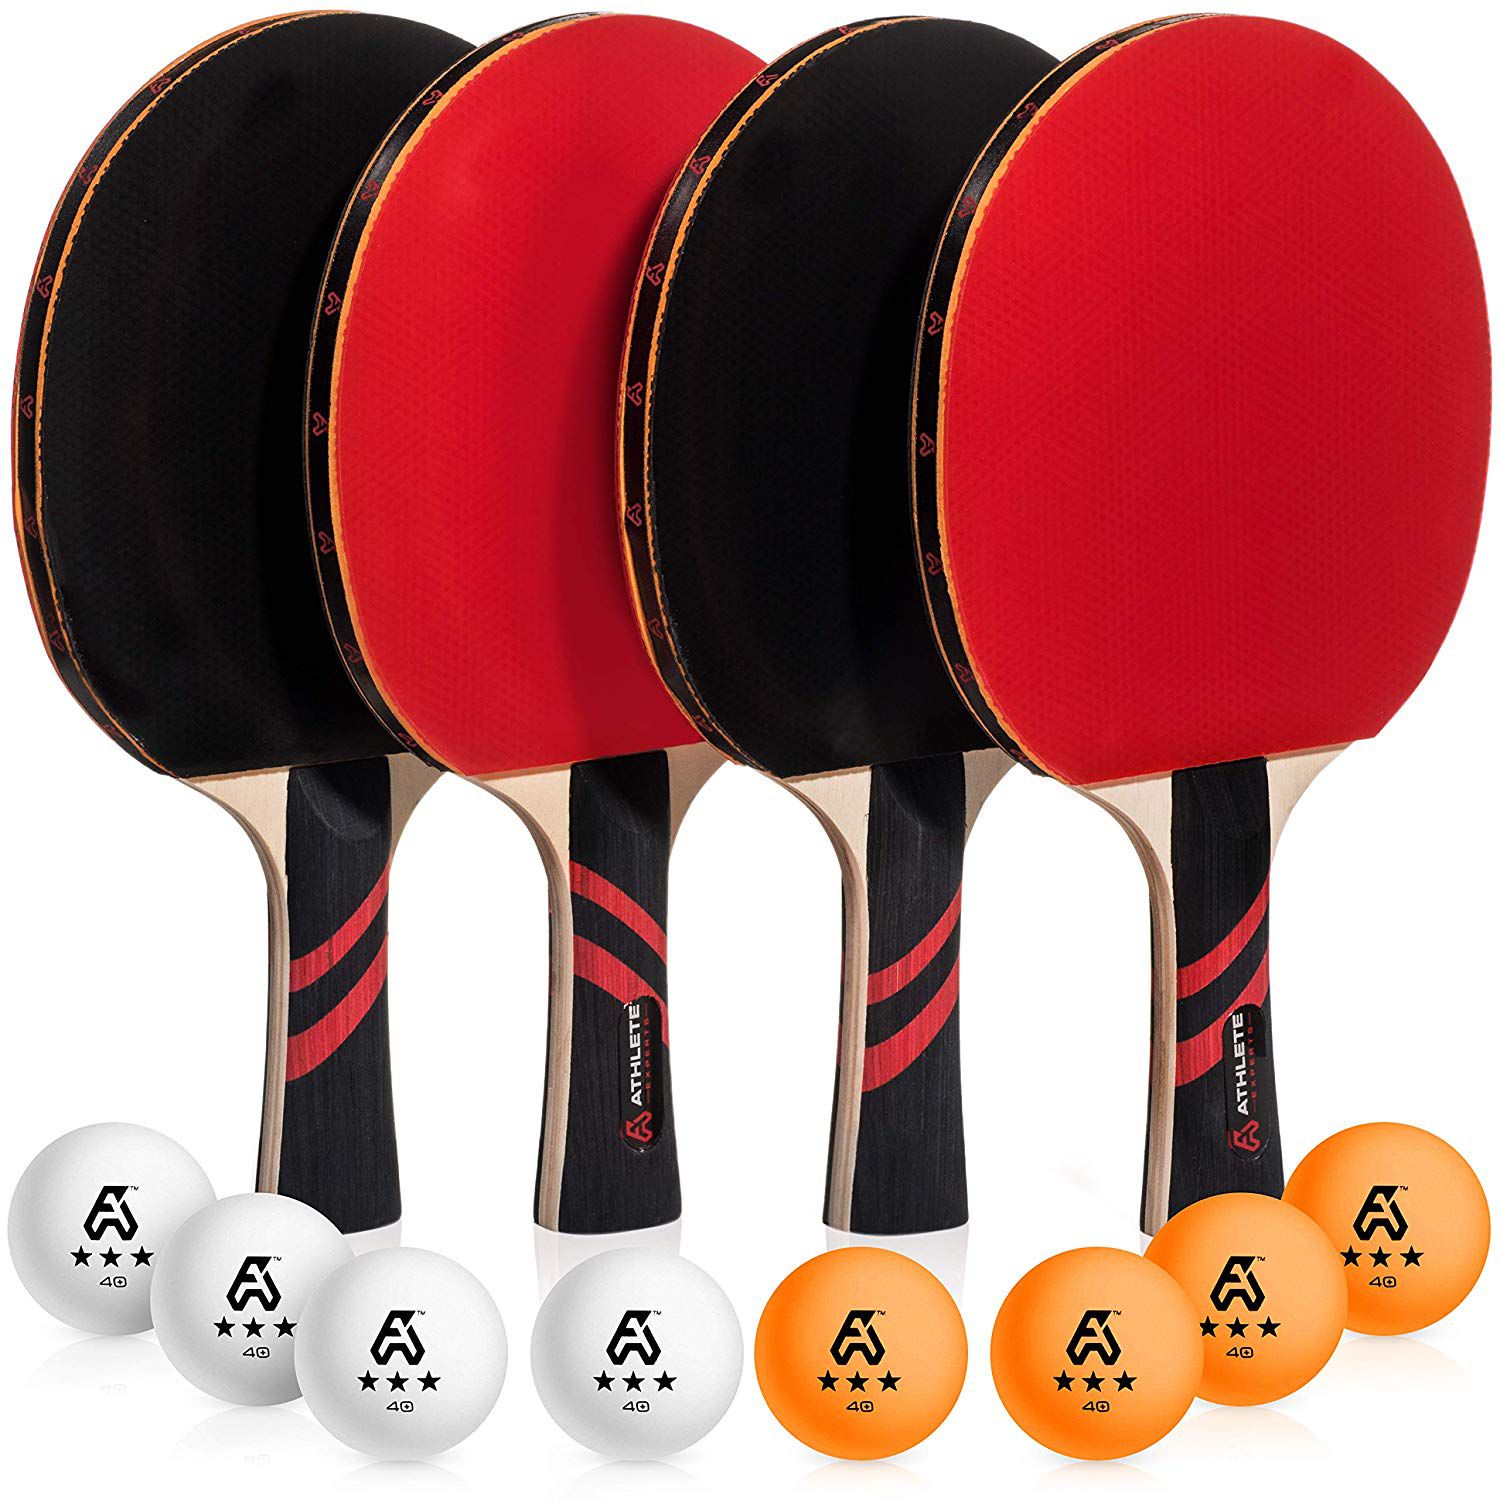 Brand new in box Ping Pong Paddle Set of 4 - Pro Wood Ping-Pong Paddles and 8 Light Regulation Table Tennis Balls - This 4-Player Racket and Ball Kit